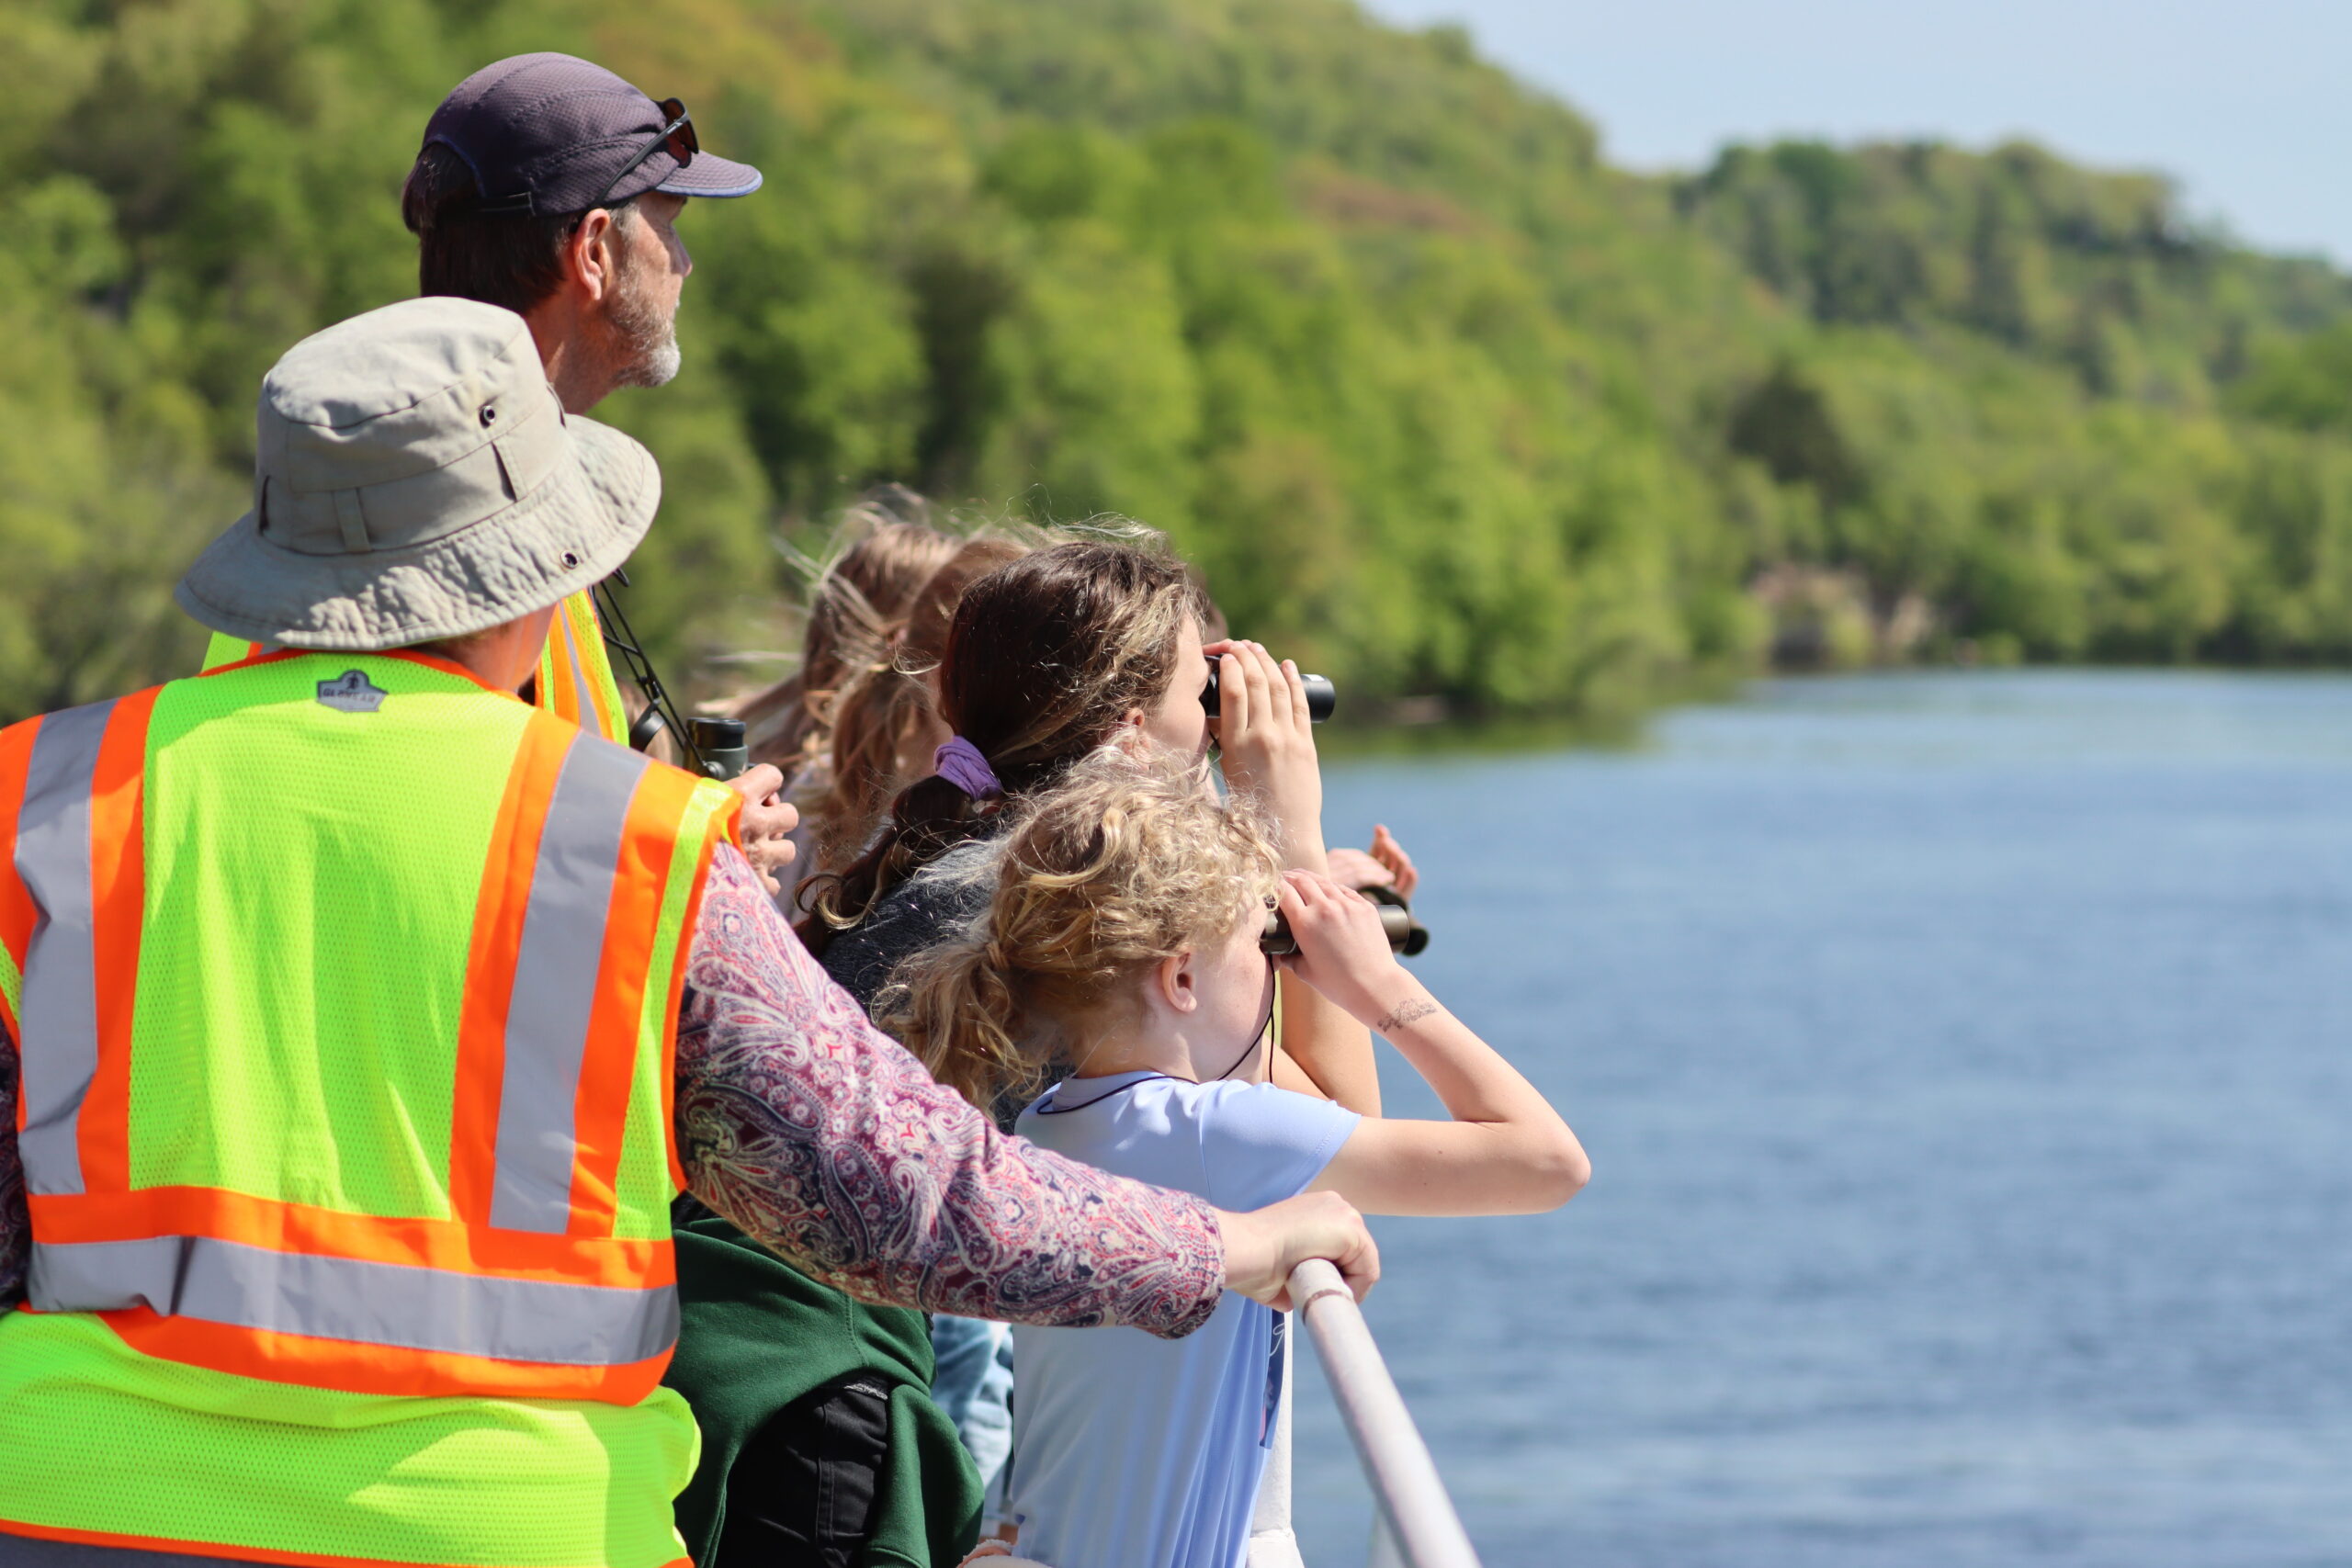 Youth (4th graders) participating in a bird watching class on the St.Croix River, part of Wild River Journey programming.